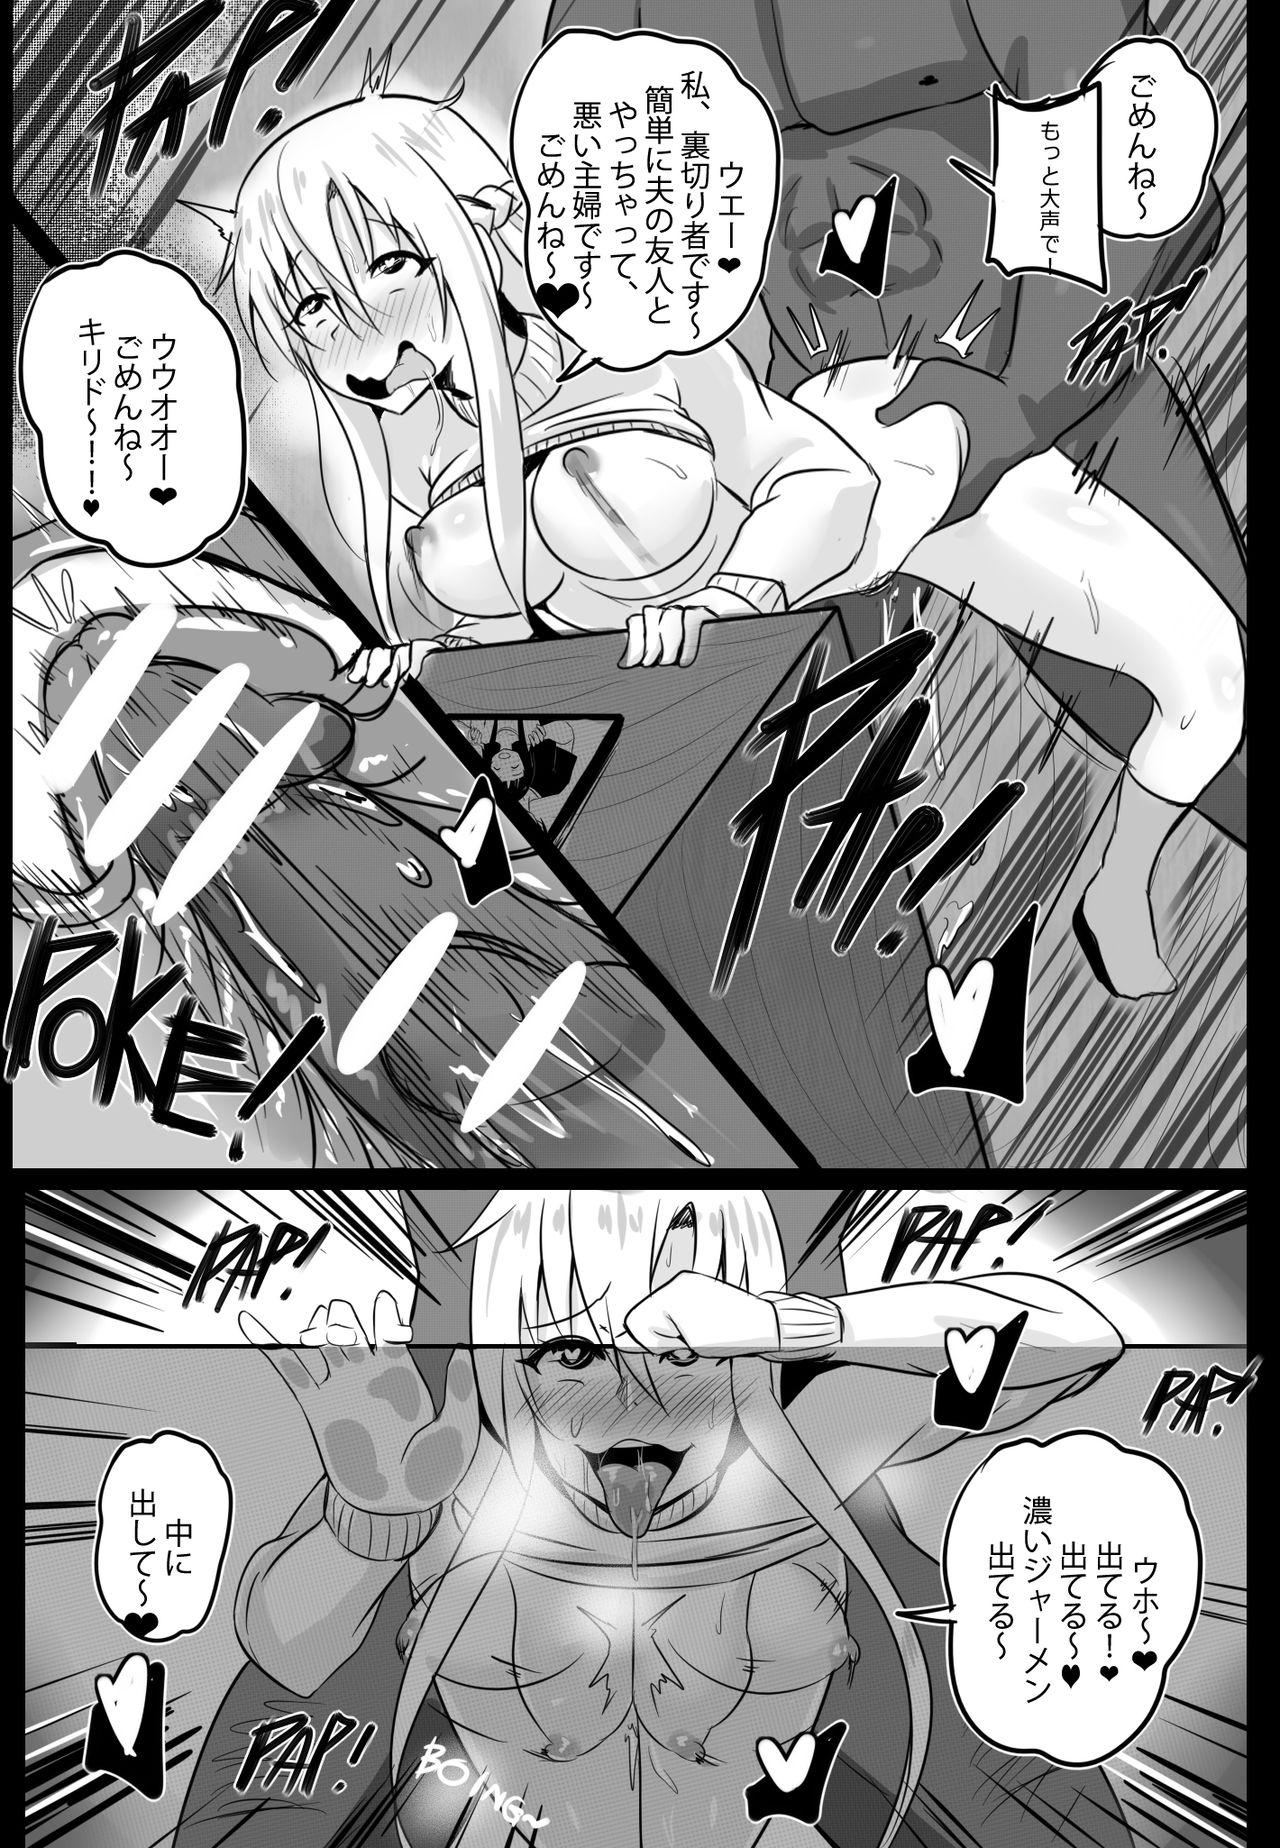 Aunt B-Trayal 19 - Sword art online Hot Girl - Page 12